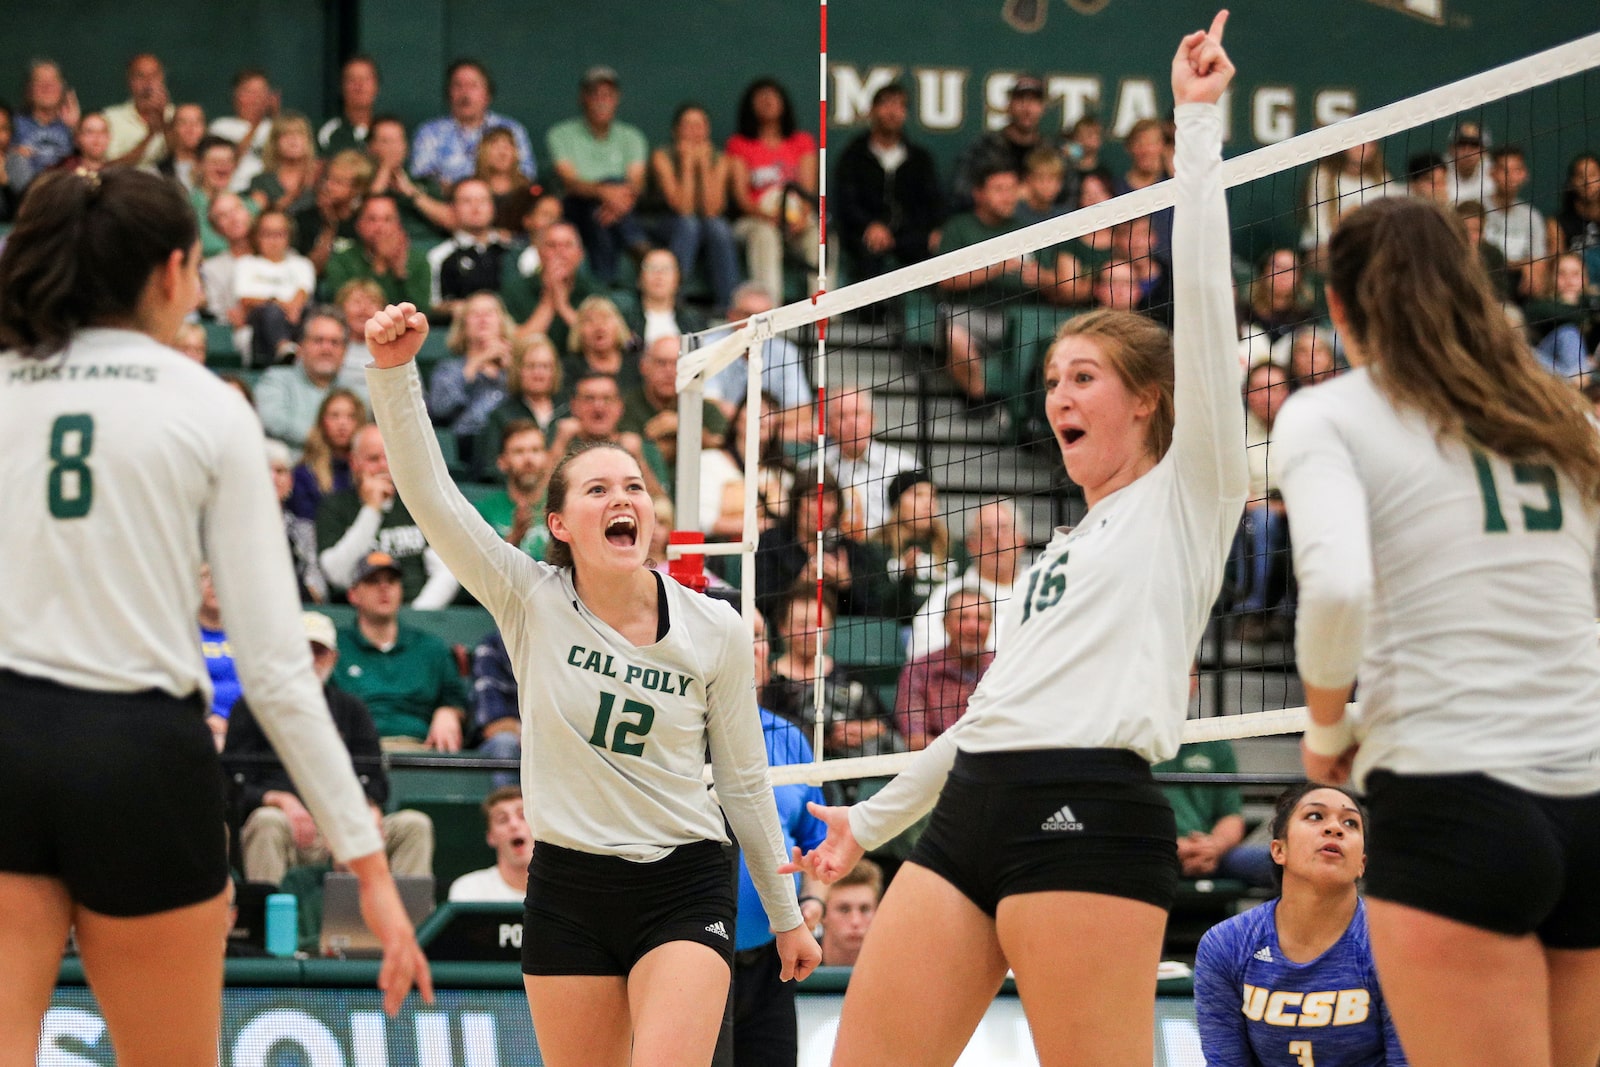 Four members of Cal Poly Women's Volleyball celebrate on the court after scoring an important point.